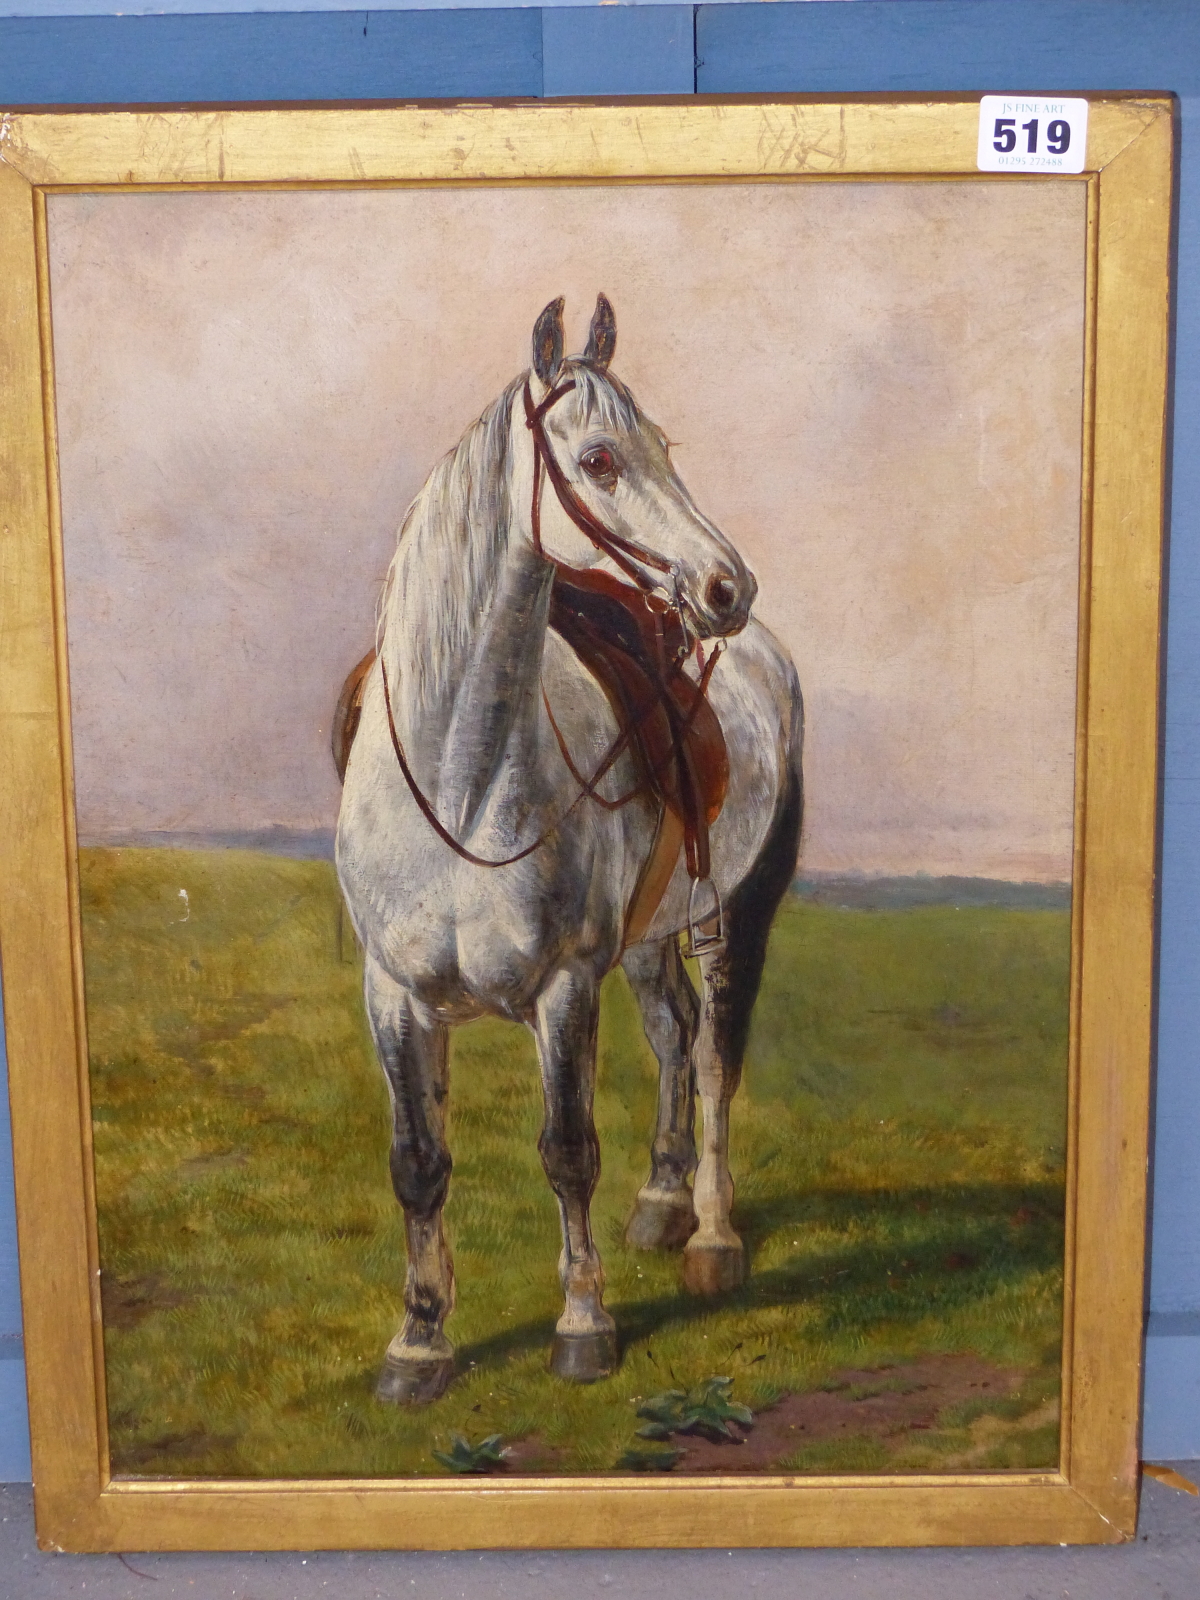 ENGLISH SCHOOL (19TH CENTURY), SADDLED DAPPLE GREY HORSE IN A LANDSCAPE, OIL ON CANVAS, RELINED, - Image 2 of 4